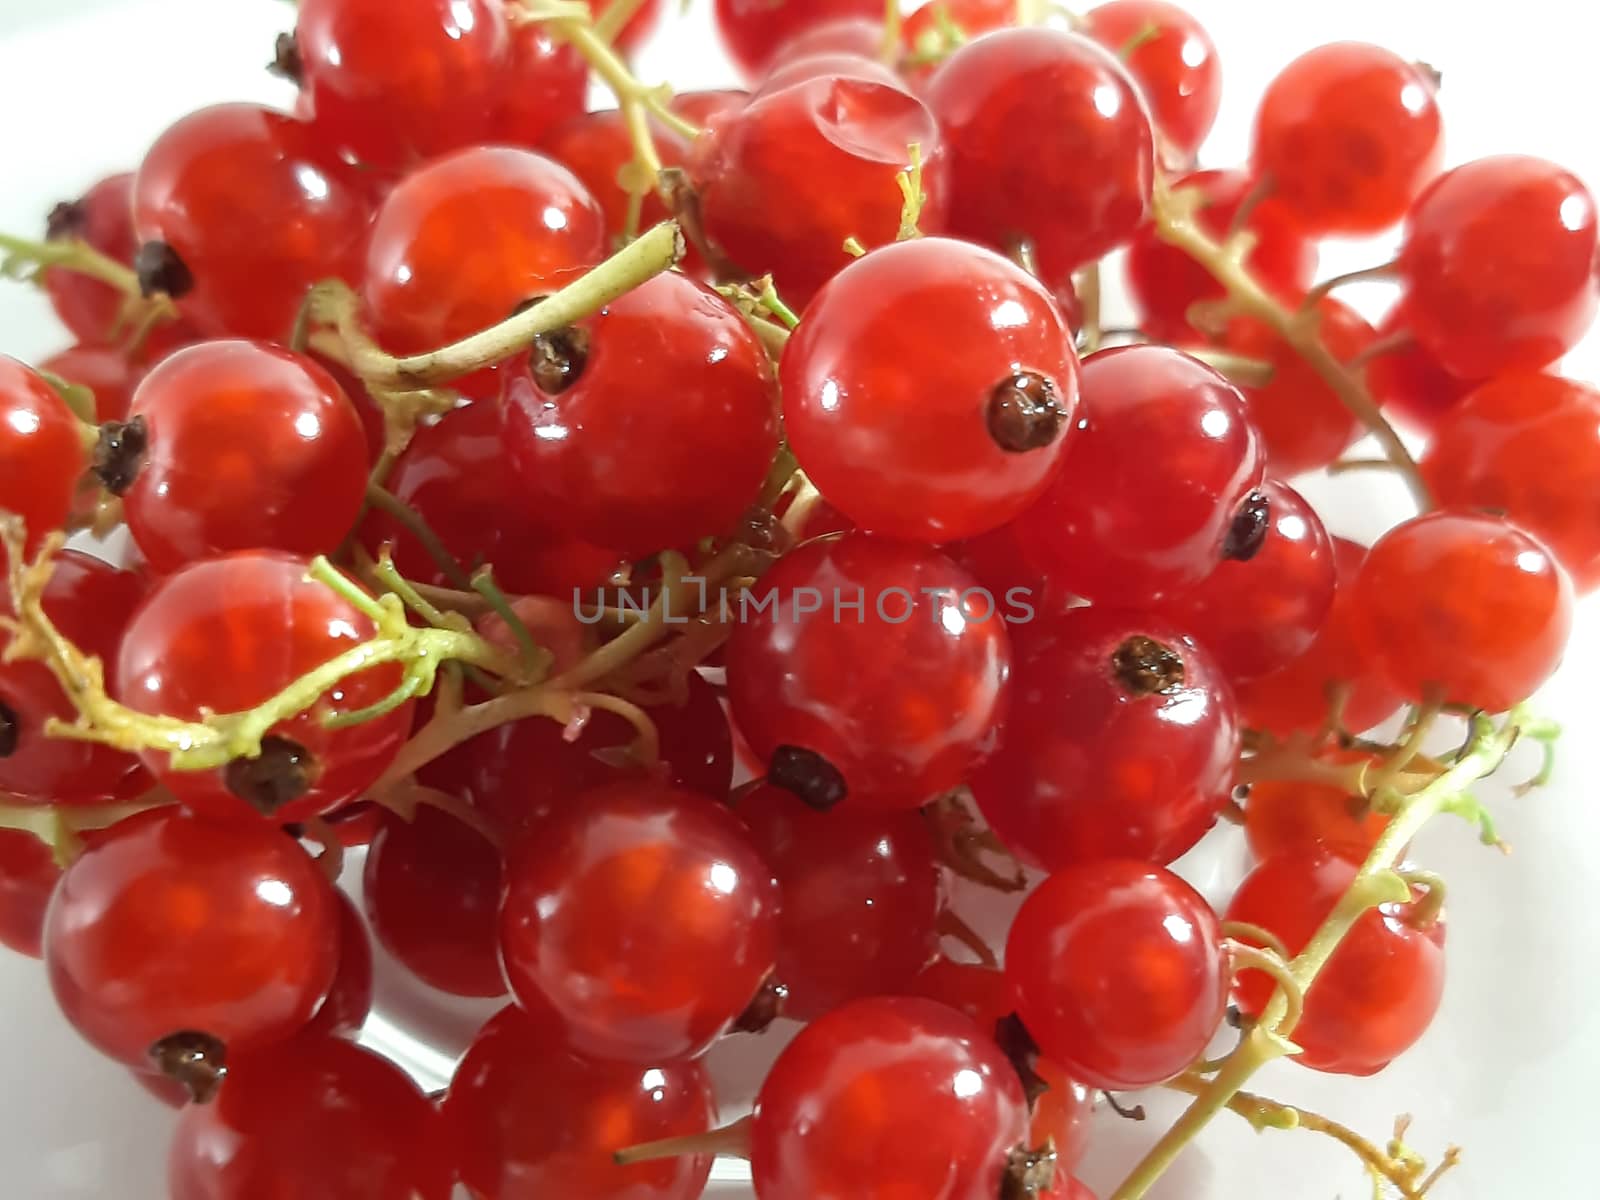 Colored fruit background. Currant close up. Photo of useful berr by polyachenkovv@gmail.com